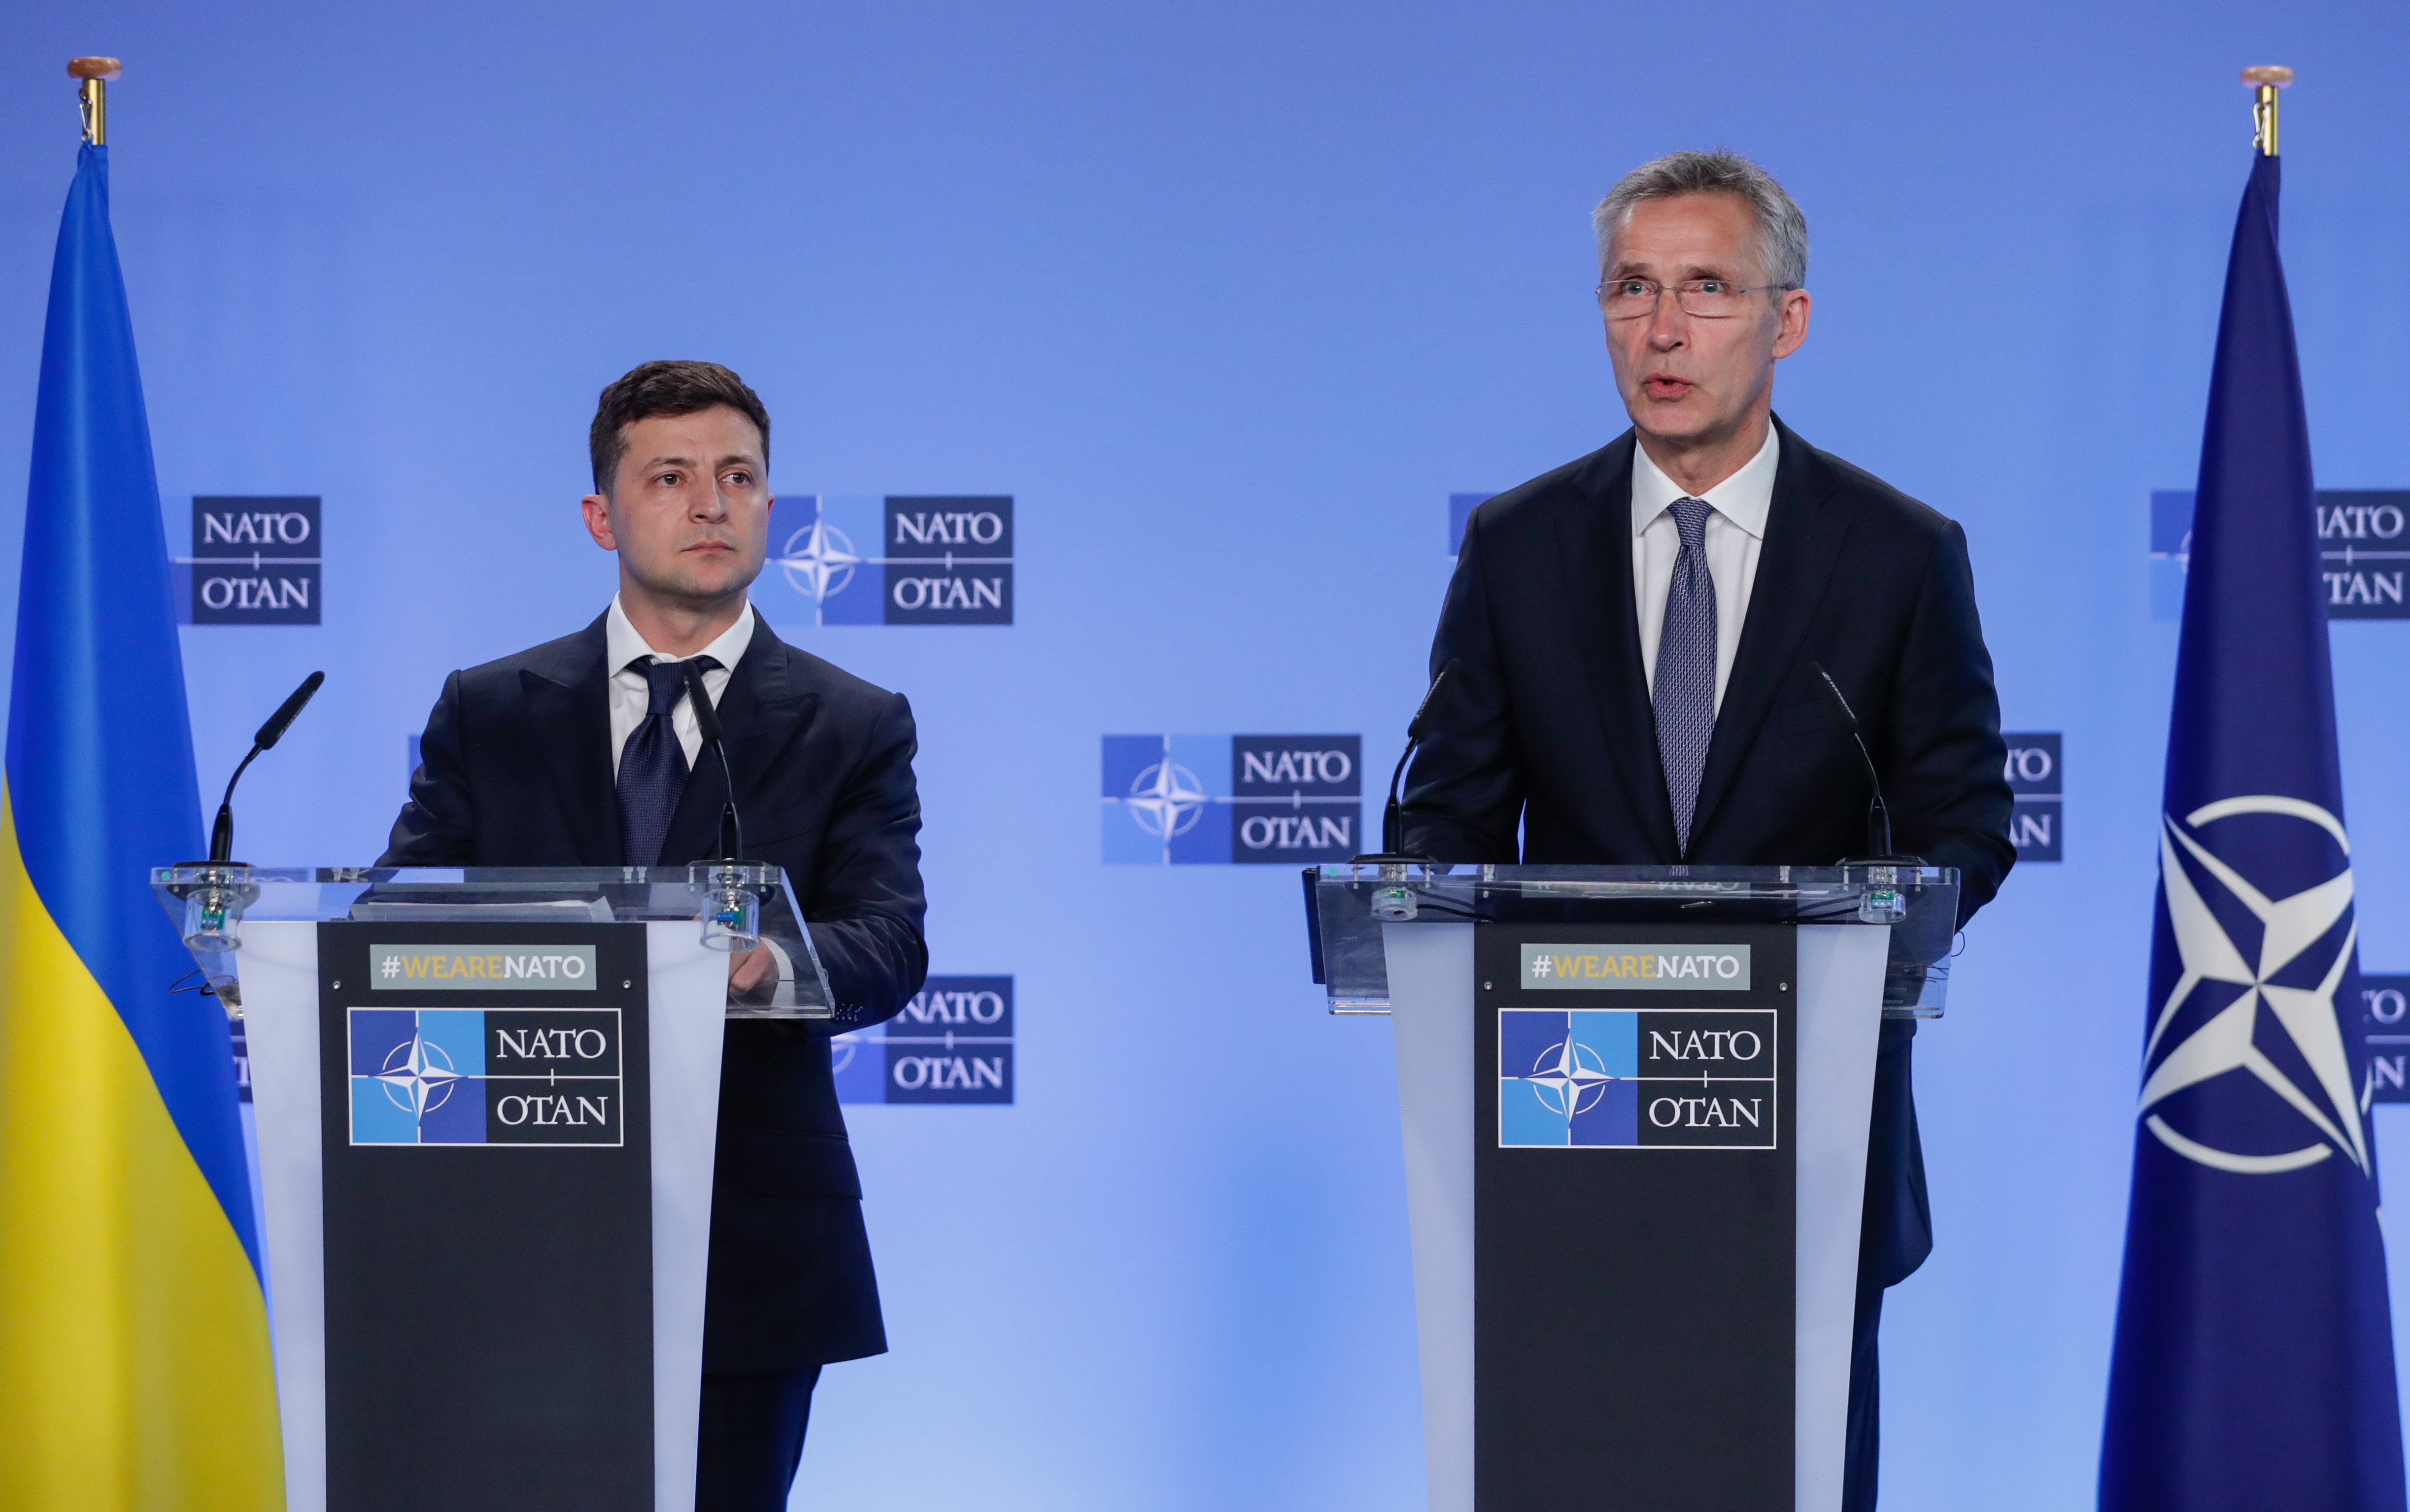 epa07625271 Ukrainian President Volodymyr Zelensky and NATO Secretary General Jens Stoltenberg  (R) give a press conference after a meeting at NATO headquarter in Brussels, Belgium, 04 June 2019.  EPA/STEPHANIE LECOCQ